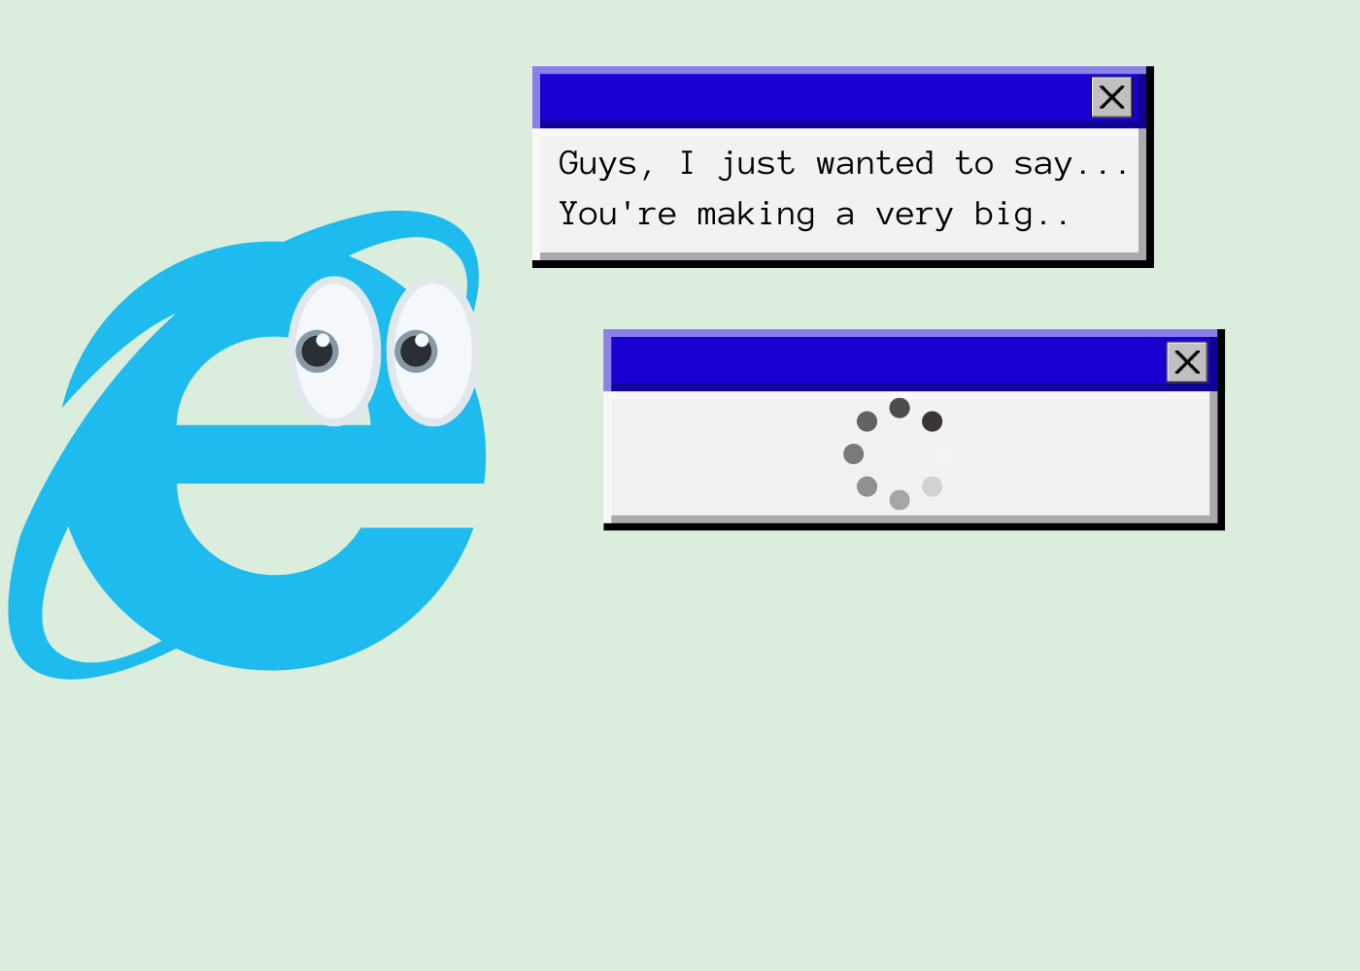 Internet Explorer has been notorious for its slow speed